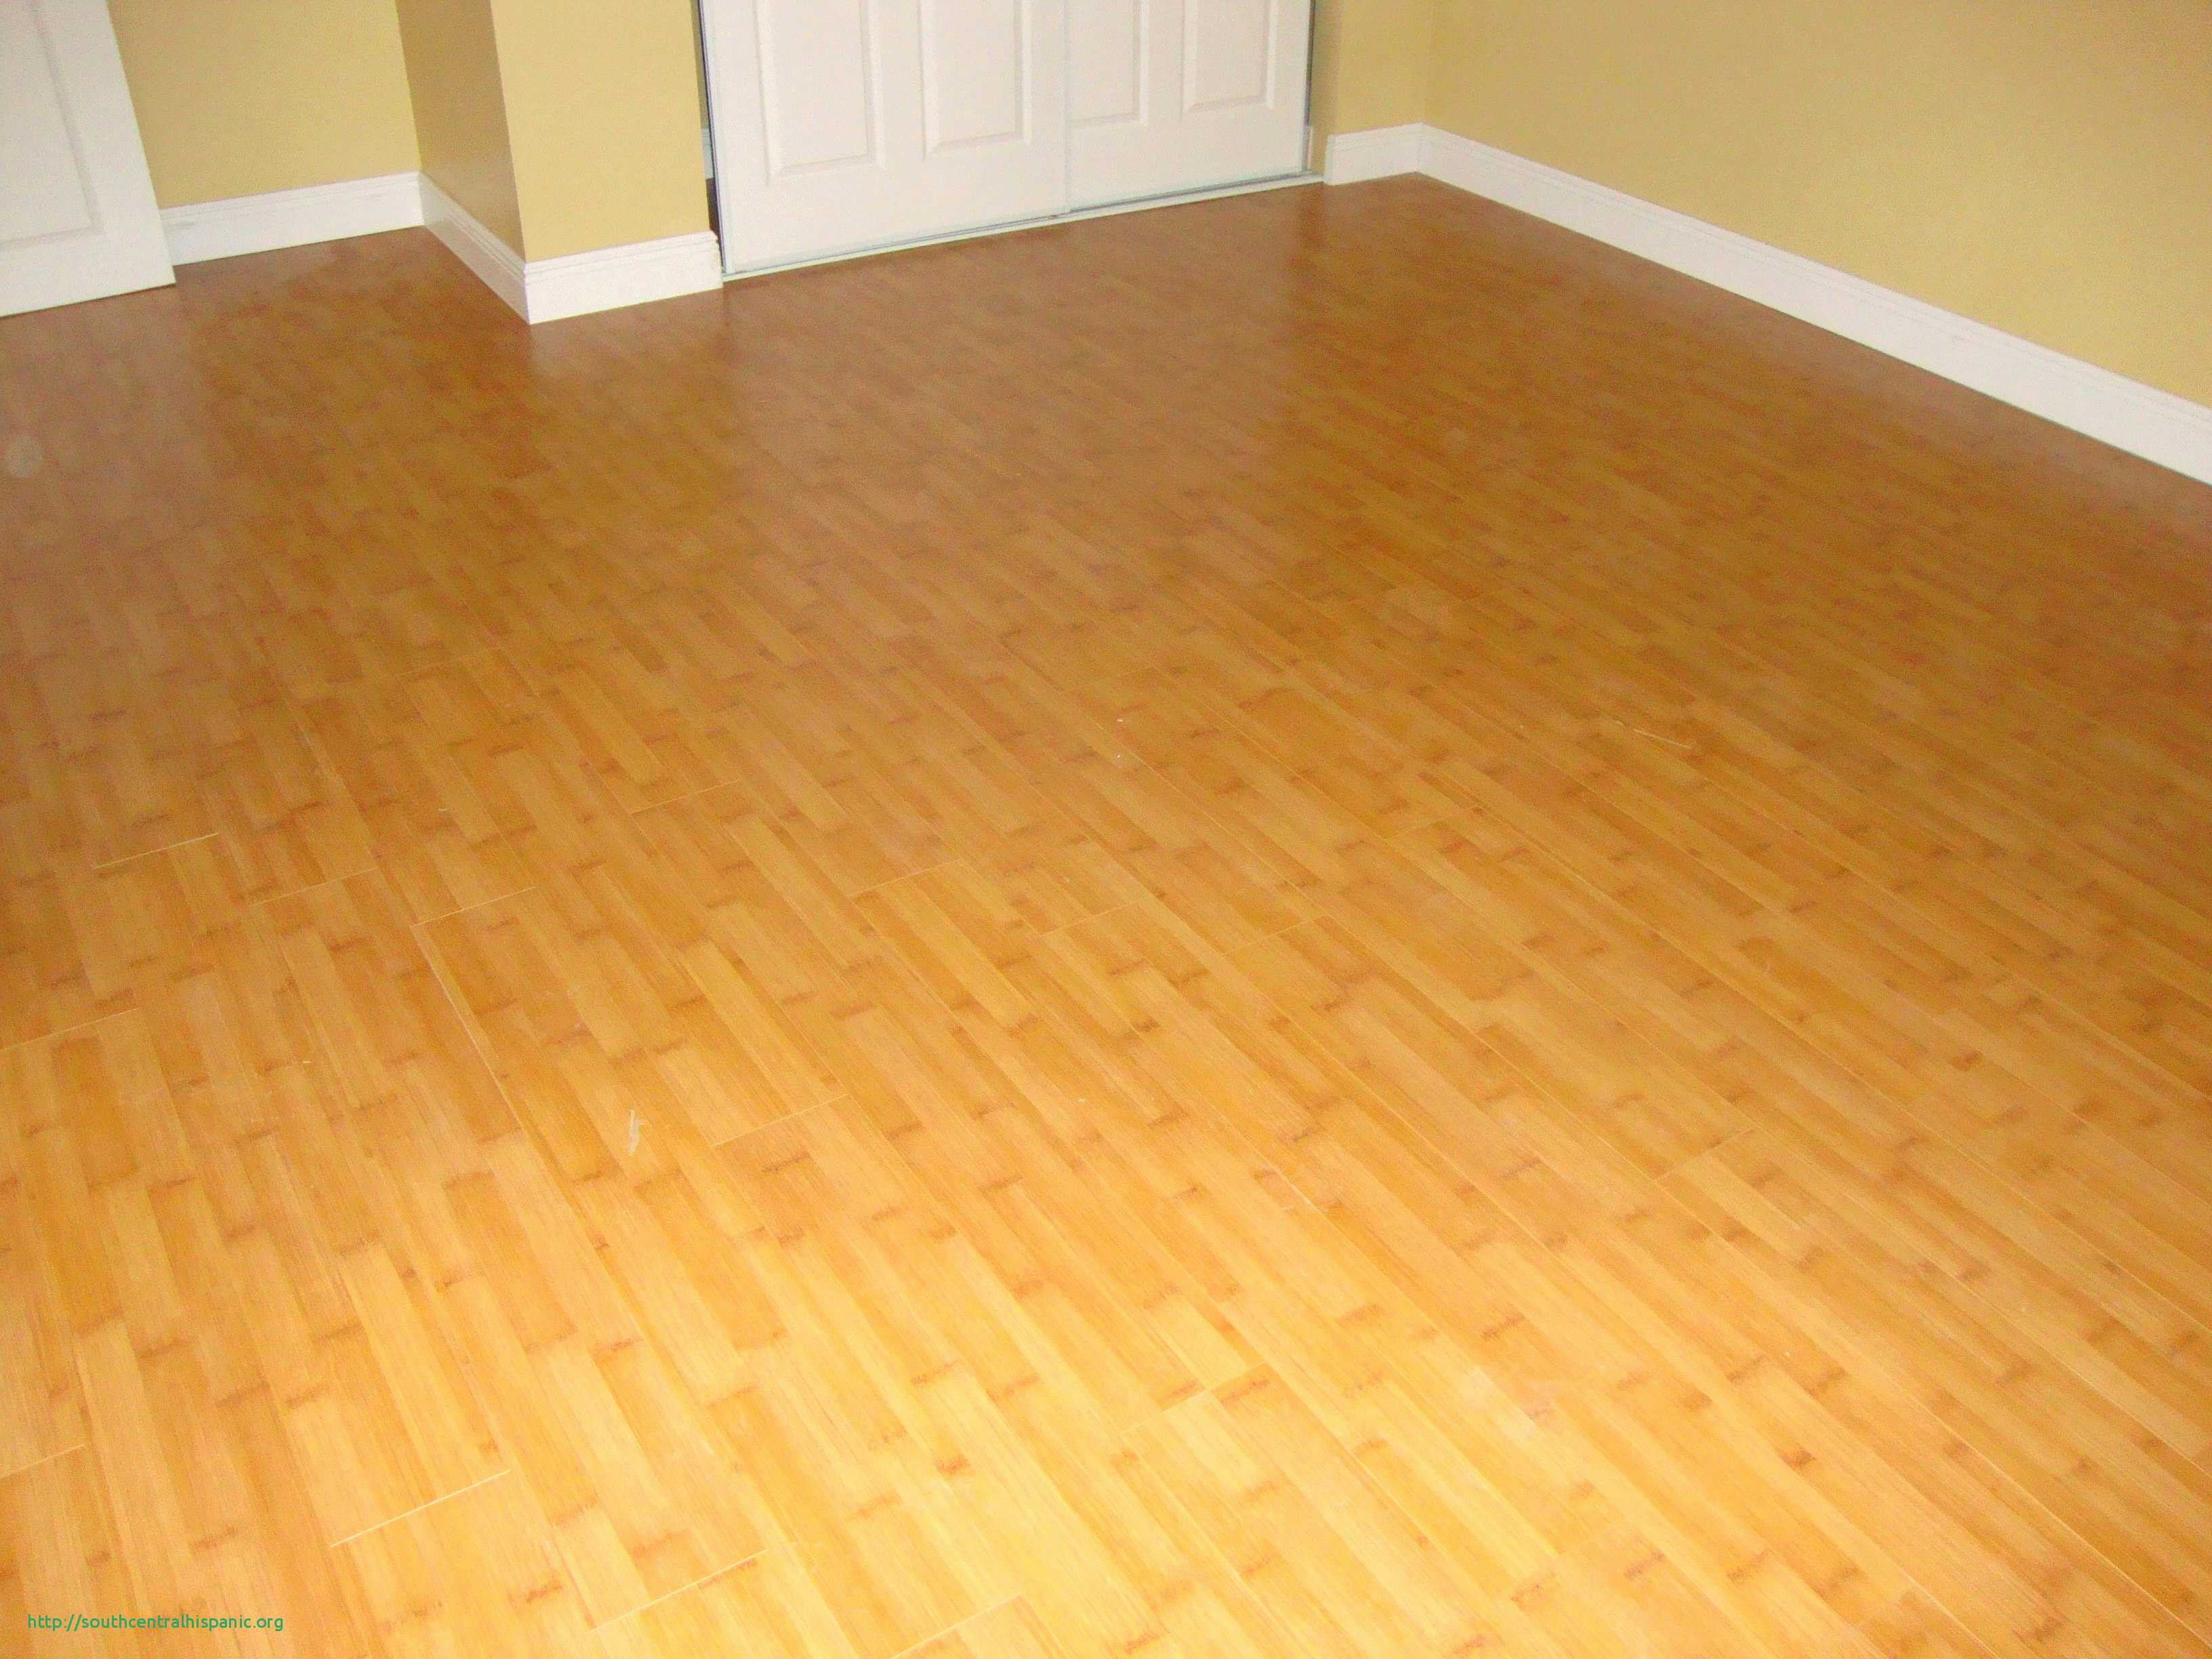 14 Recommended Laminate Hardwood Flooring Cost Per Square Foot 2024 free download laminate hardwood flooring cost per square foot of 15 inspirant hardwood flooring cost per sq ft ideas blog intended for cost hardwood floors per square foot 50 fresh hardwood flooring cost 